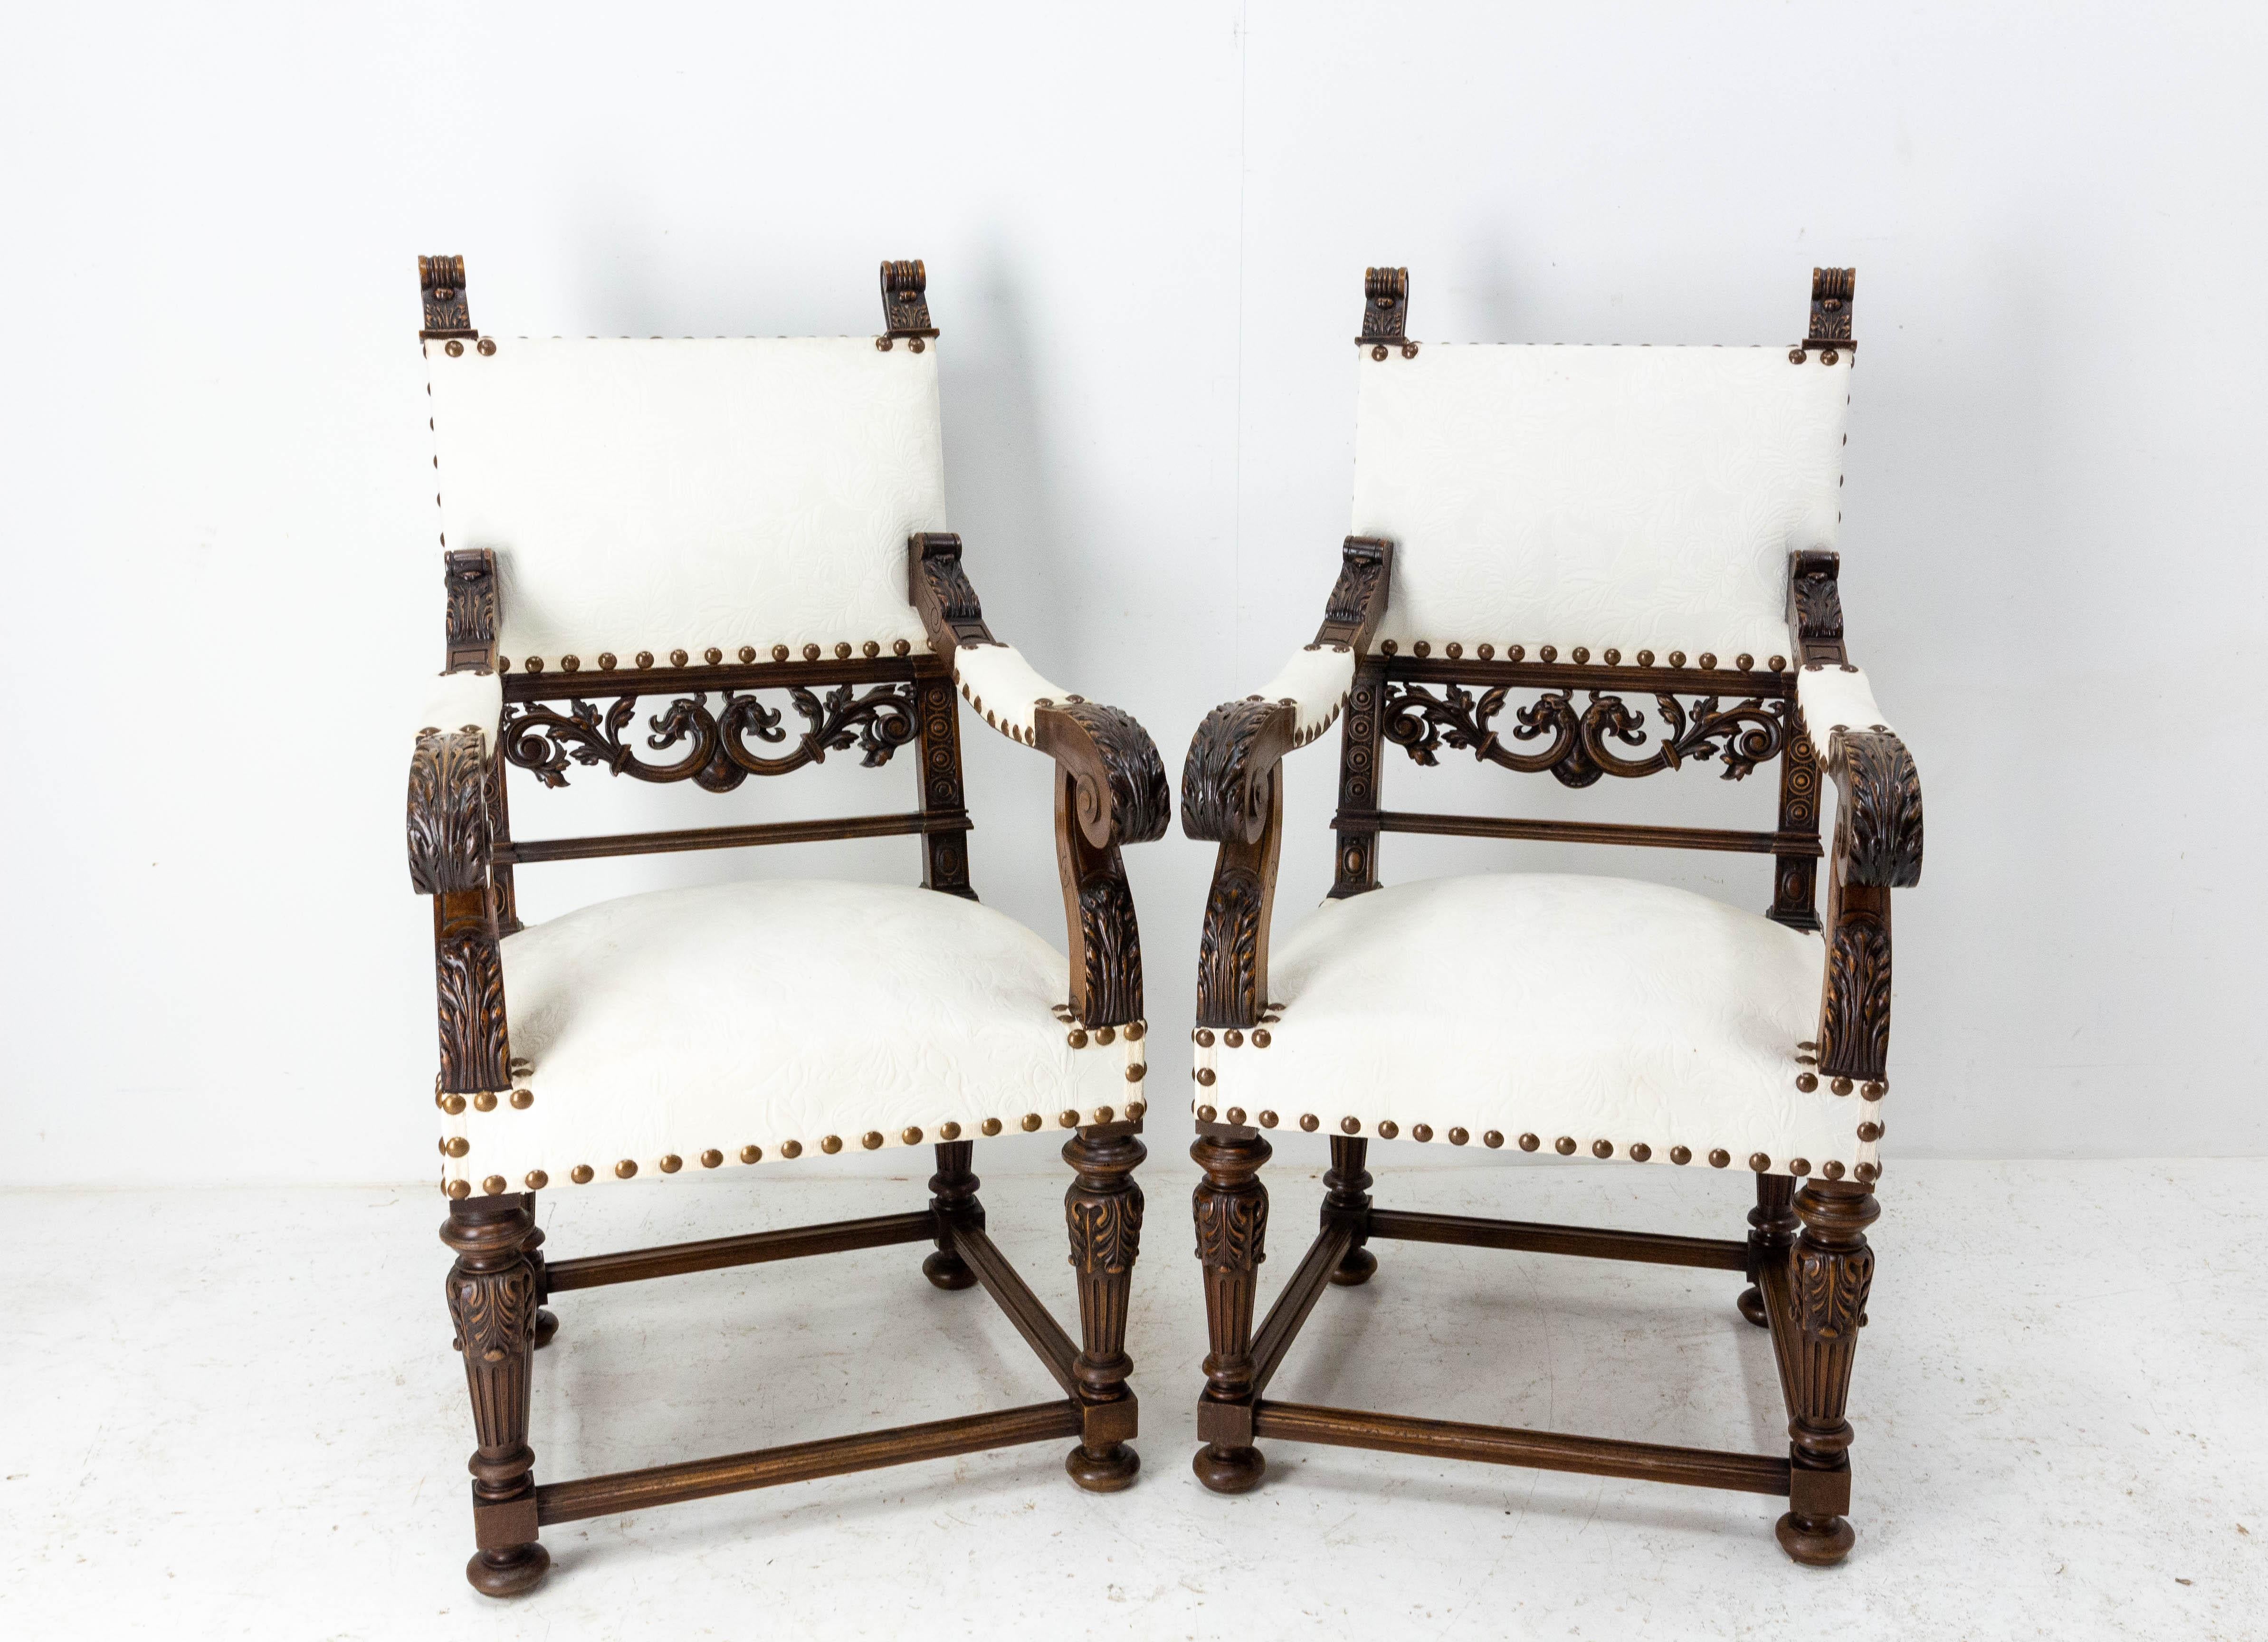 Pair of French fauteuils, open armchairs side or desk chairs Louis XIII revival,
Very fine wood carving work
To be recovered.
circa 1850.
Very good condition.
Frames sound and solid.

Shipping:
L129 P61 H112 30Kg